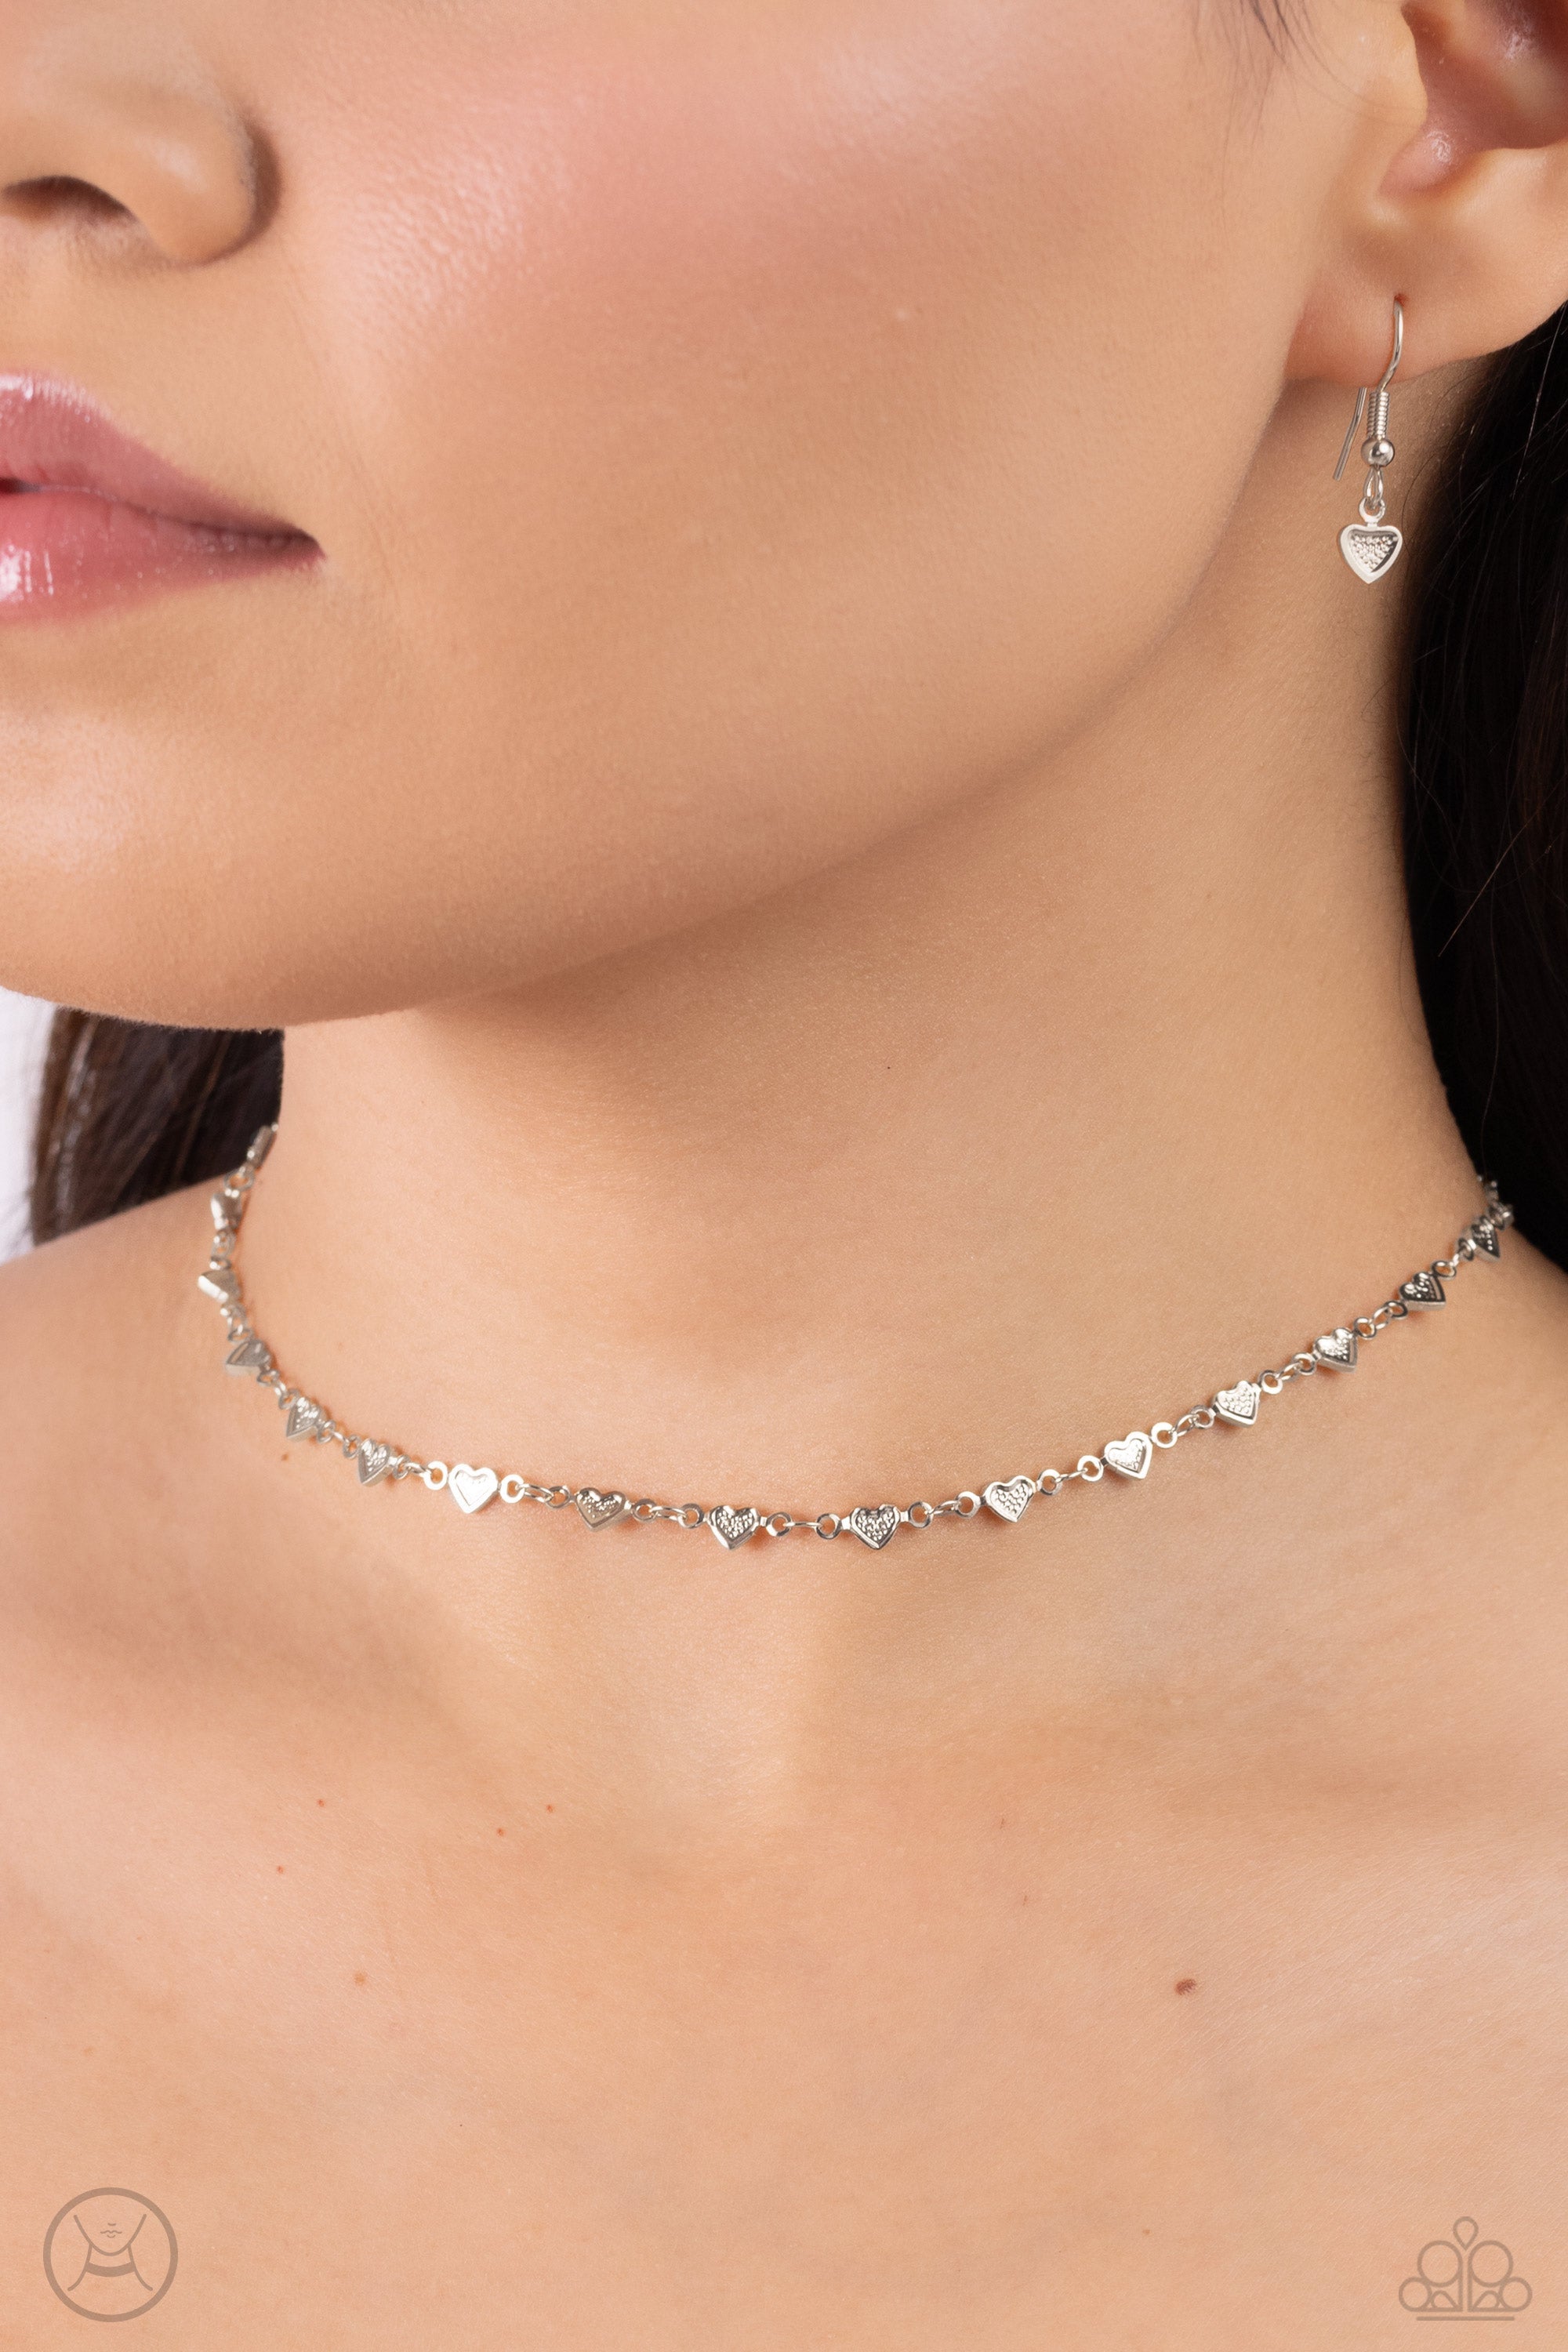 Cupid Catwalk Silver Heart Choker Necklace - Paparazzi Accessories- lightbox - CarasShop.com - $5 Jewelry by Cara Jewels